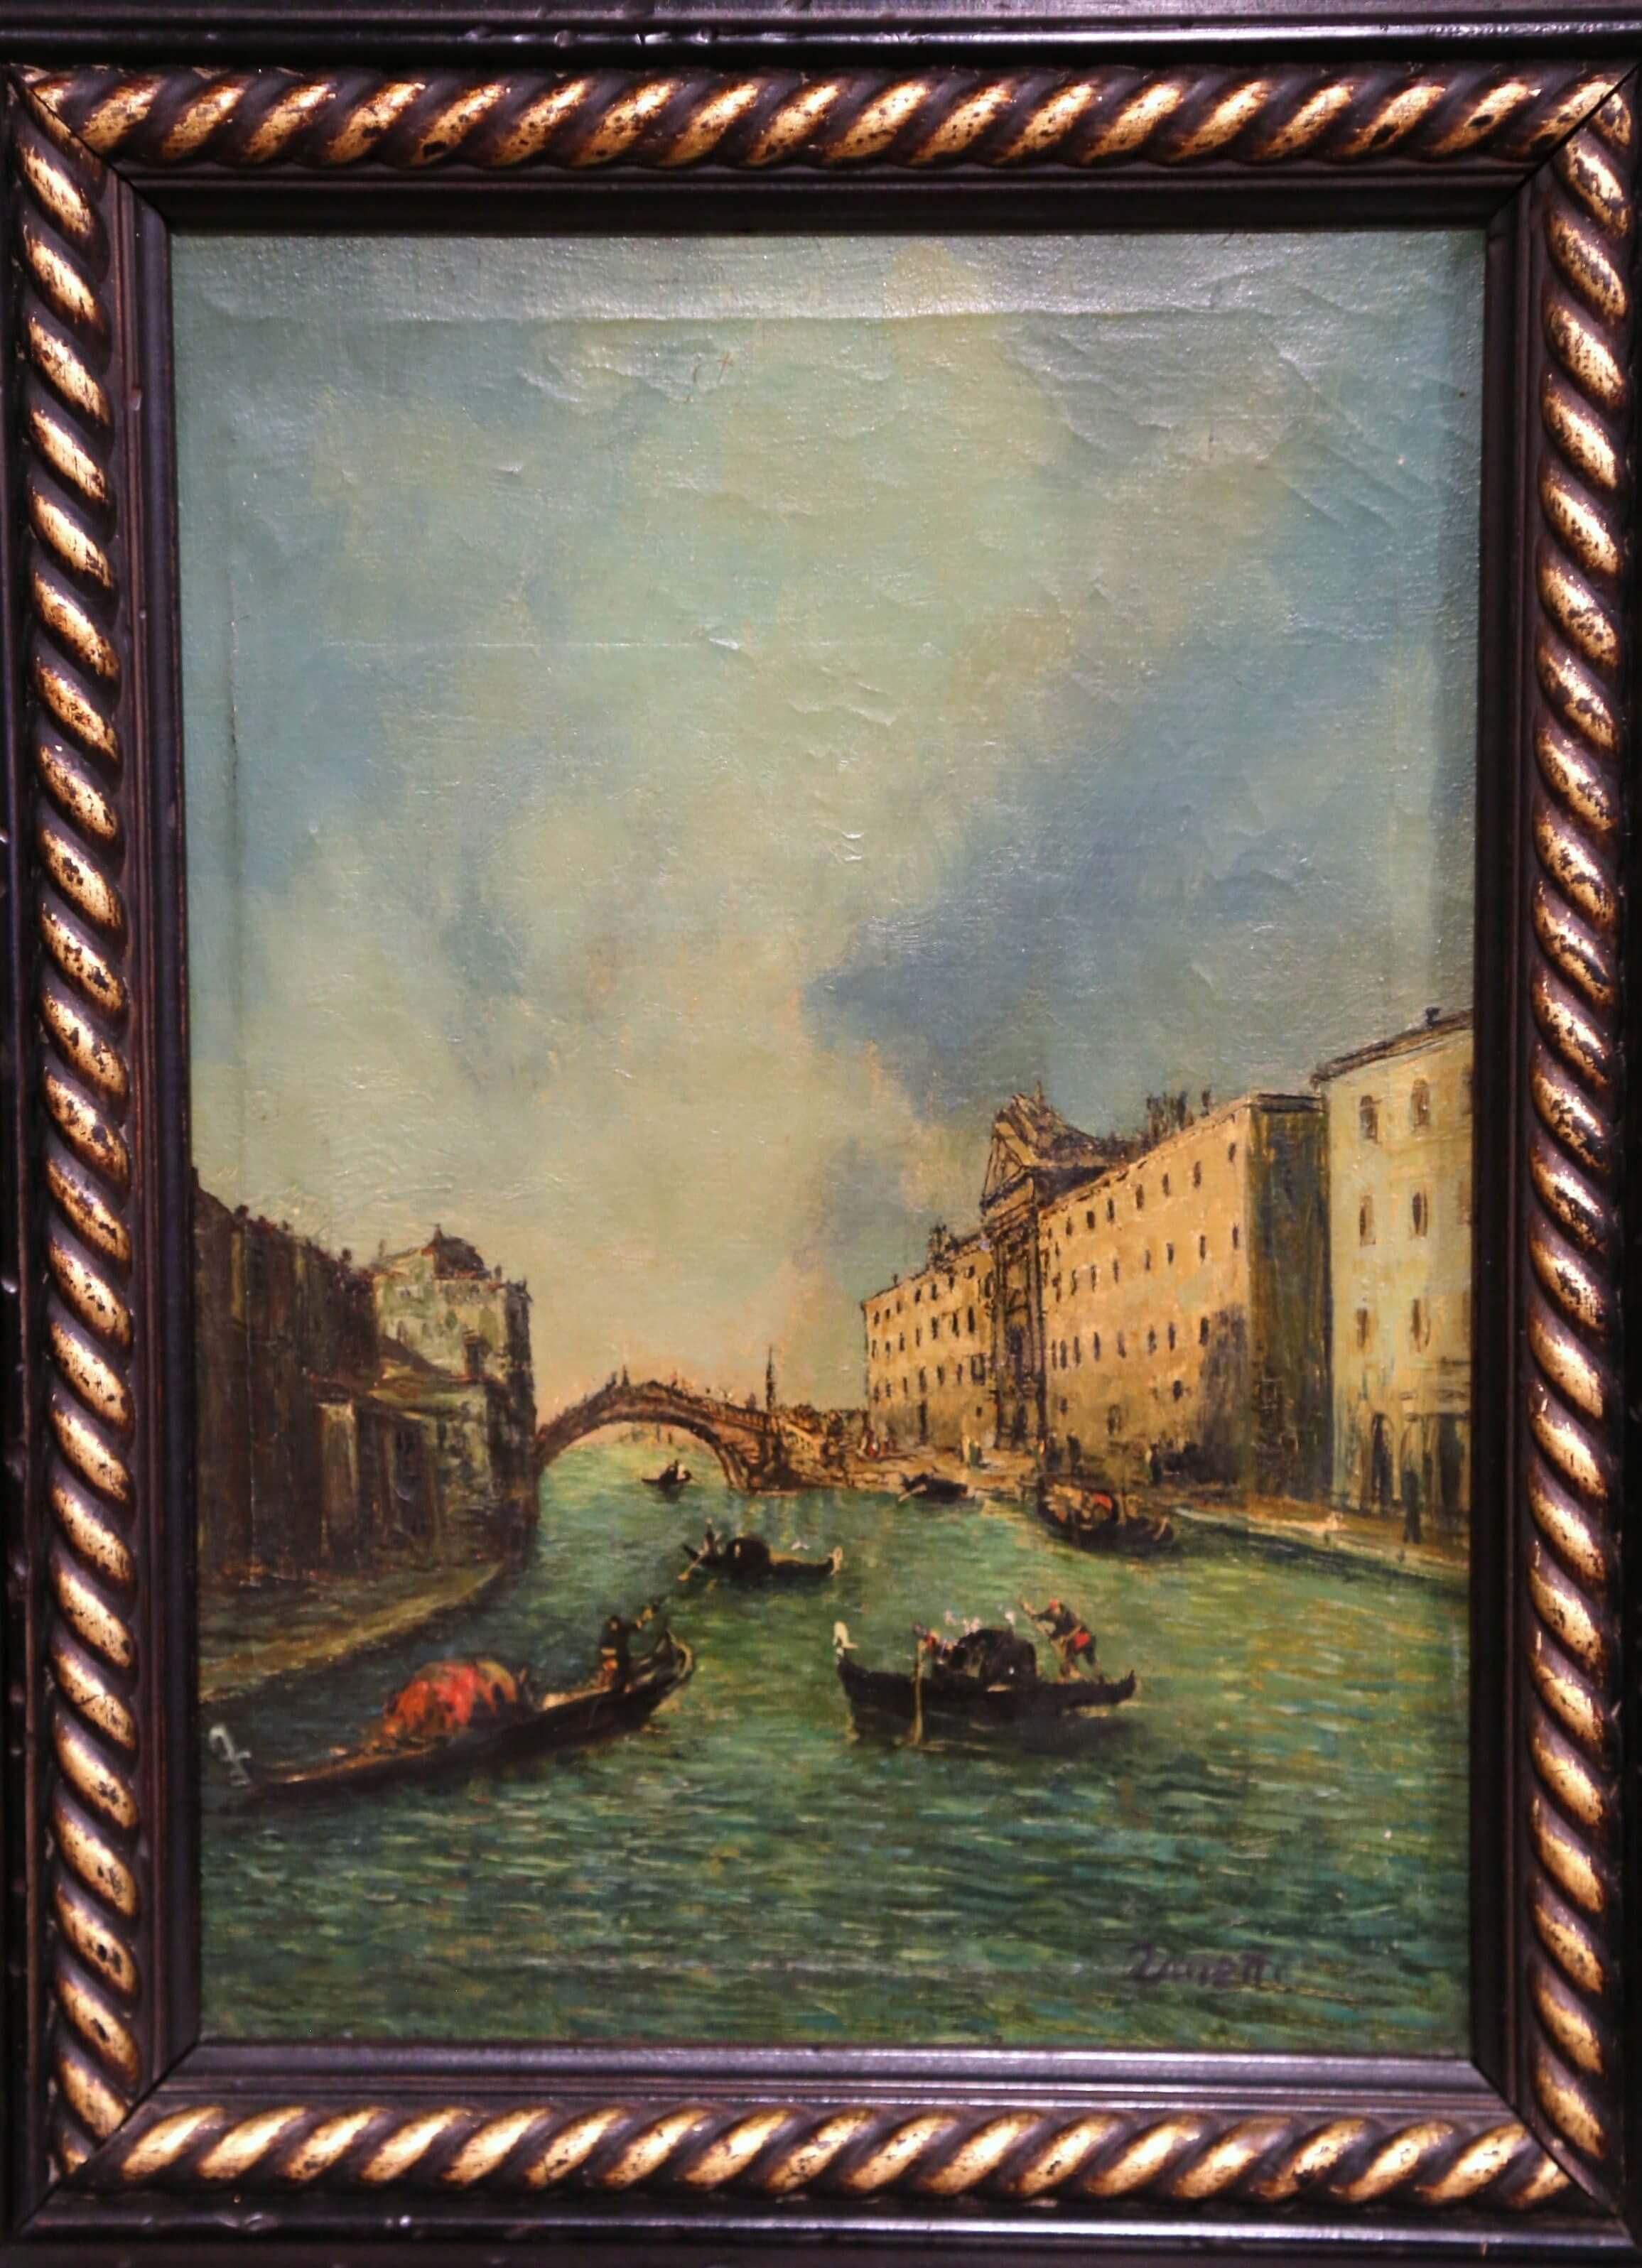 Pair of 19th Century Framed Oil on Canvas Venetian Scene Painting Signed Zanetti 1